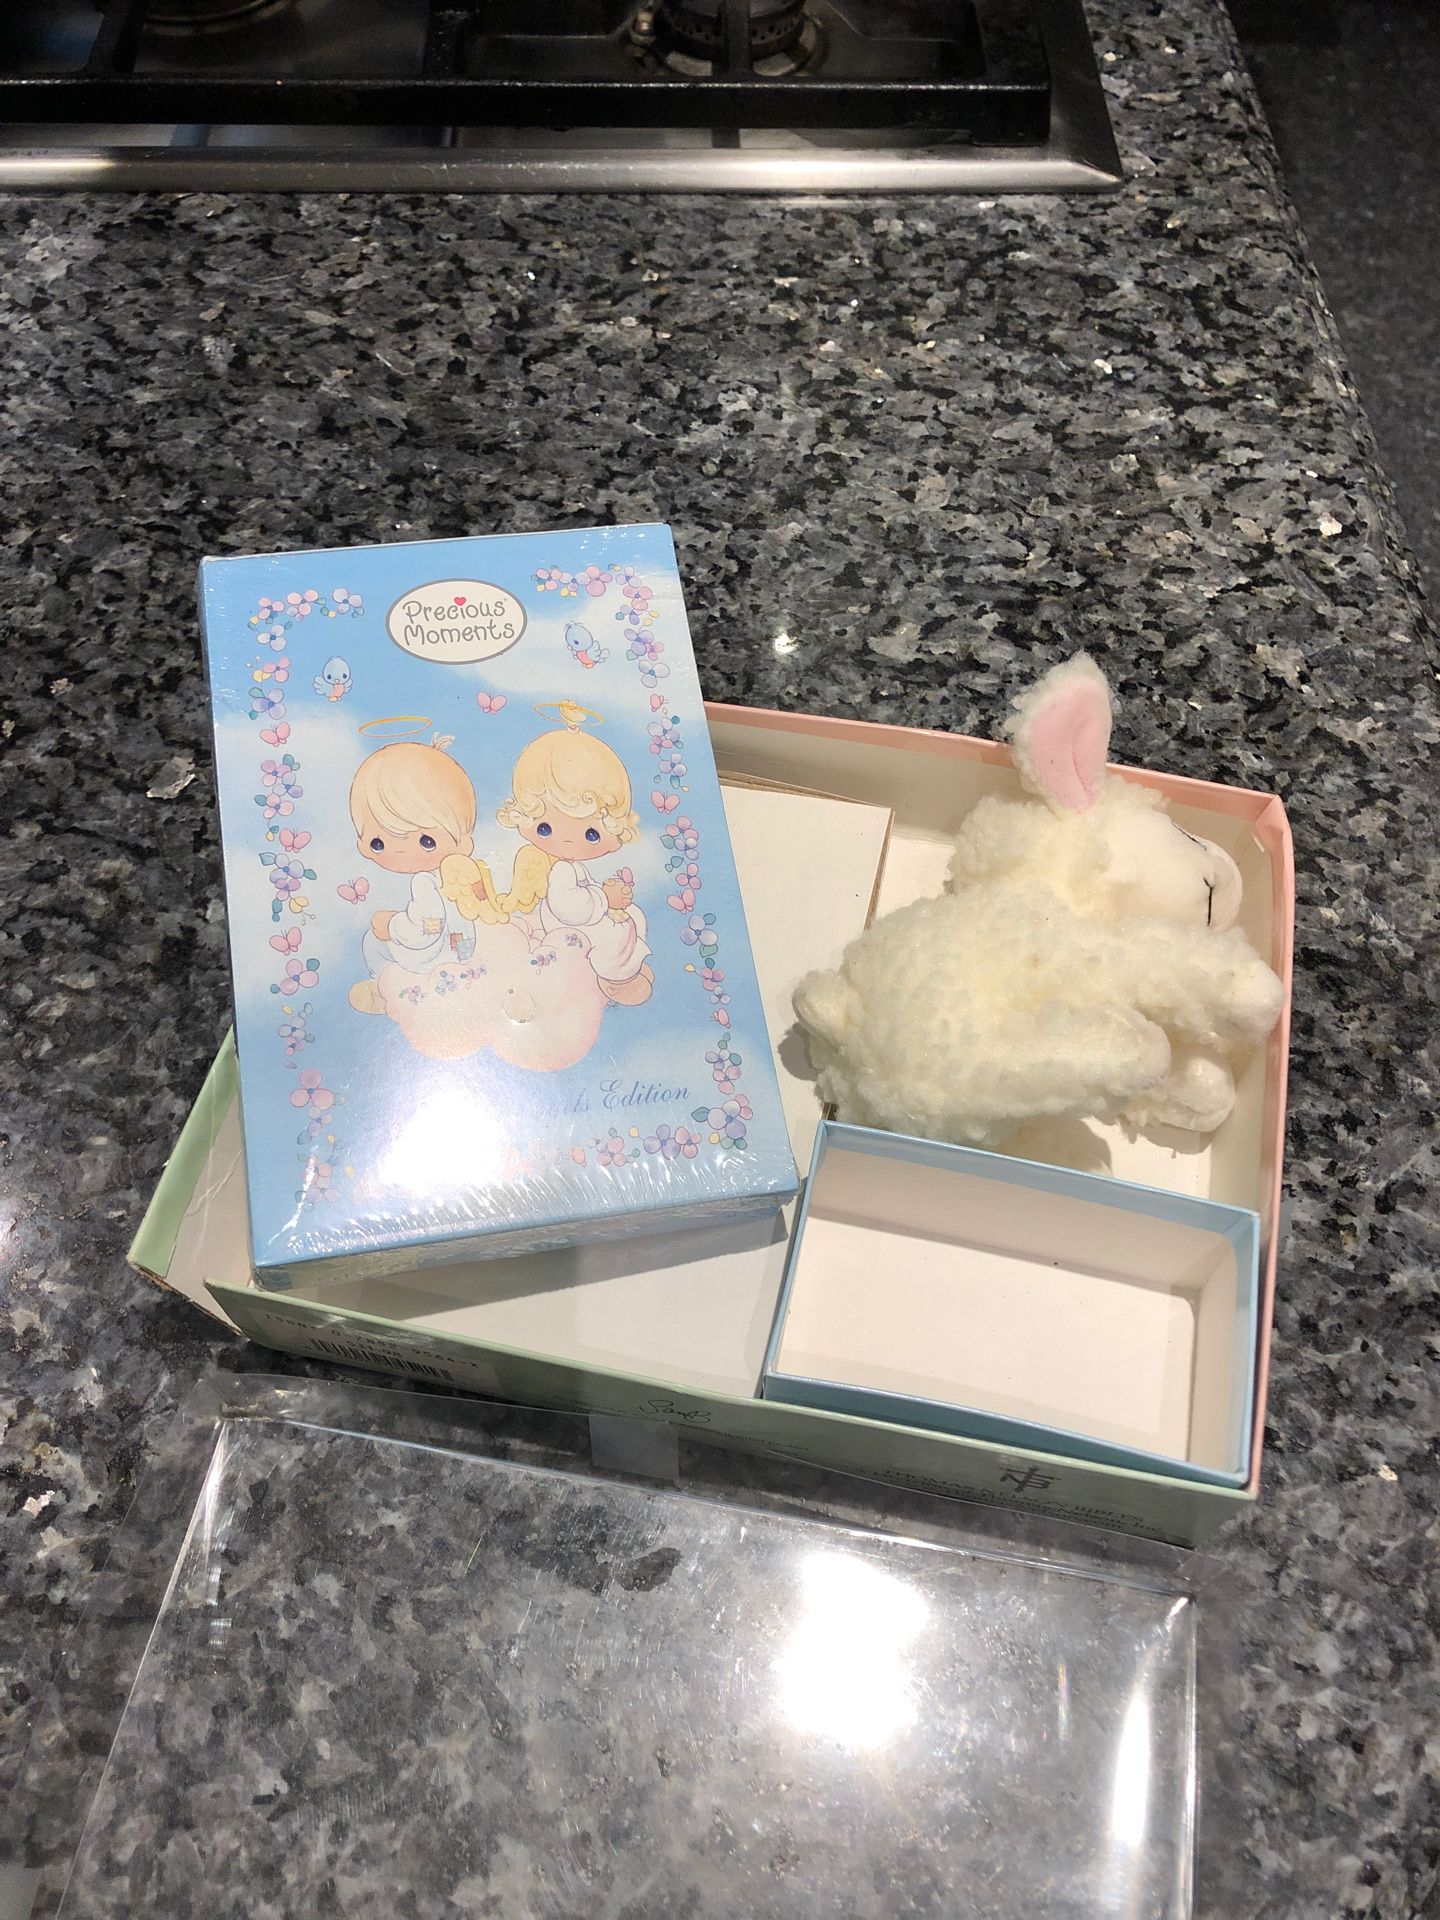 Precious moments angel Bible (new) with Lamb